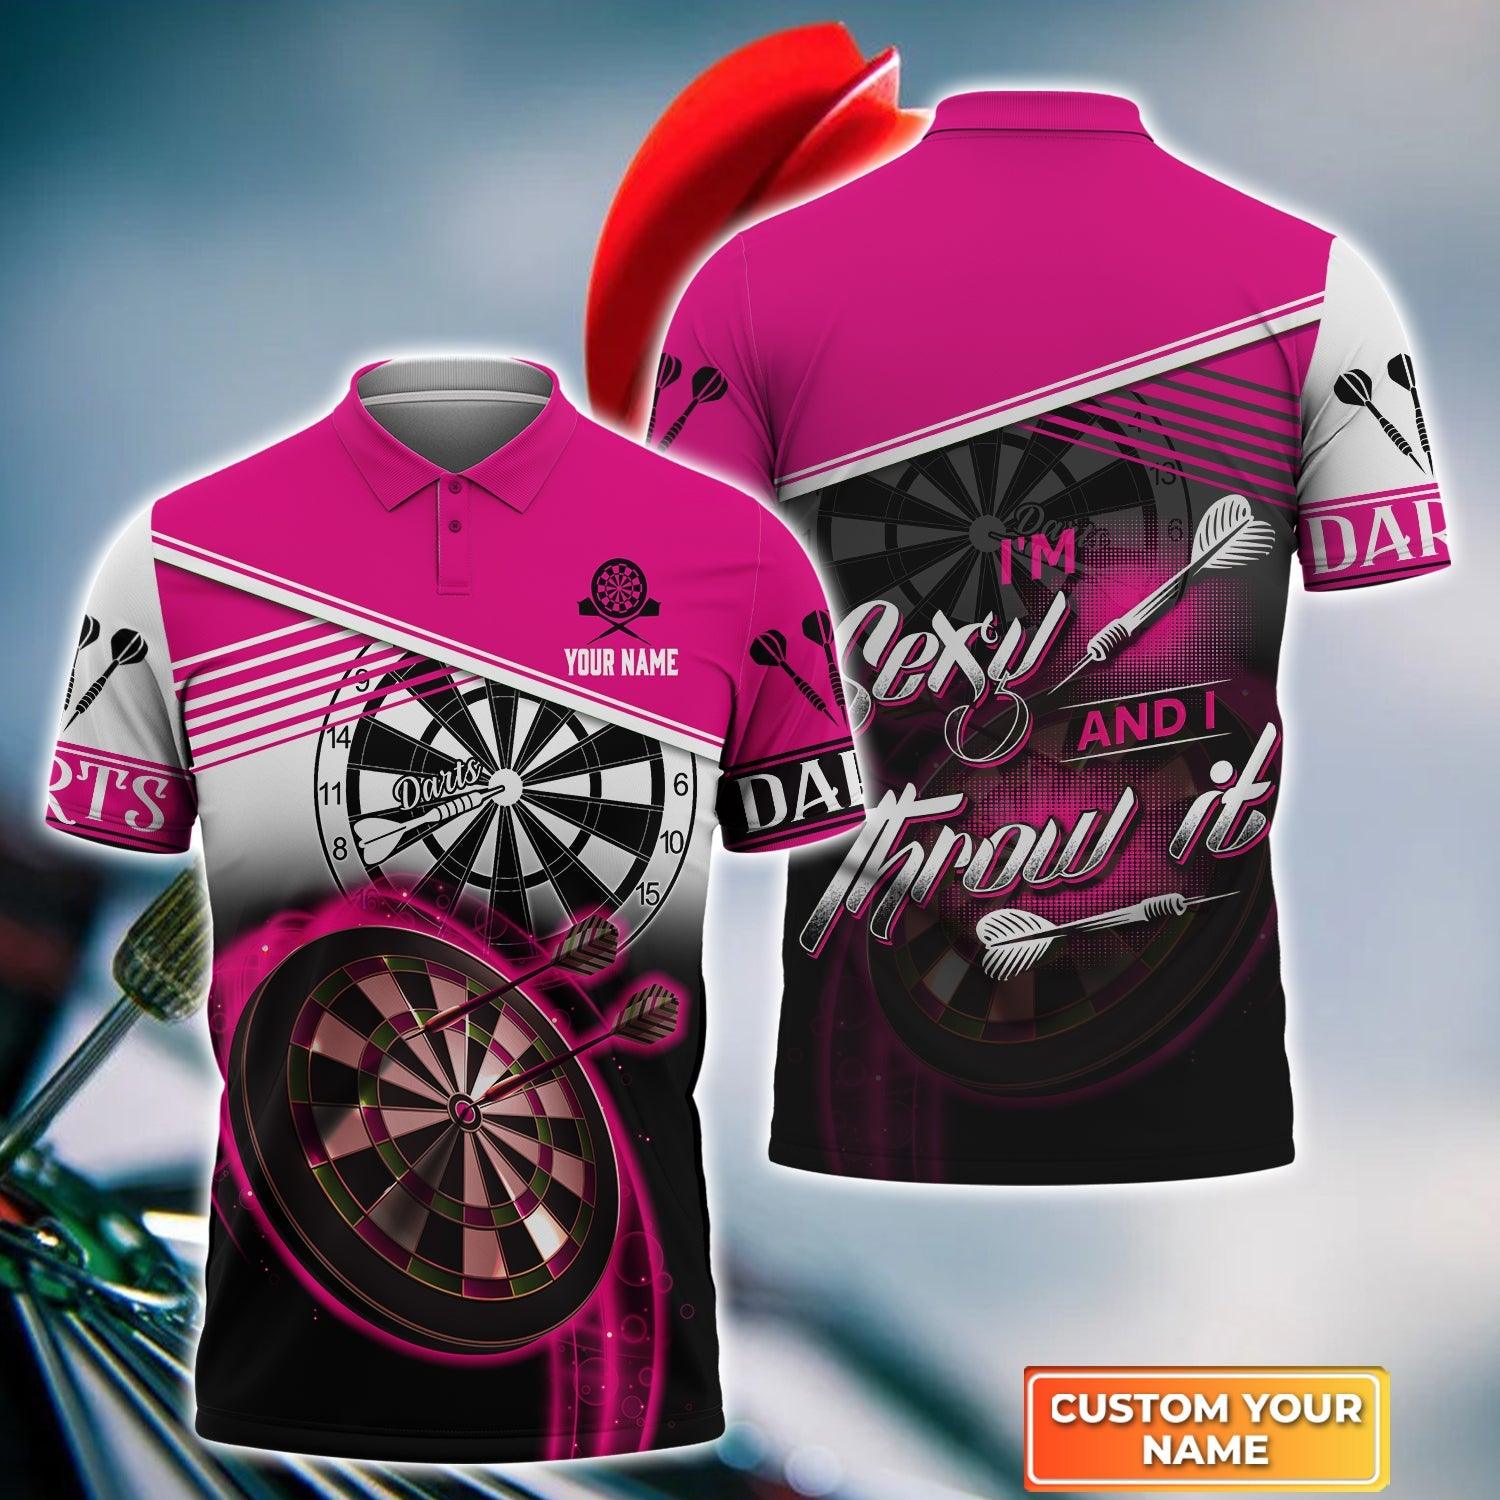 Darts Custom Name Men Polo Shirt, Dartboard Personalized Pink Men Polo Shirt Gift For Darts Lovers, Friend, Team, I'm Sexy And I Throw It - Amzanimalsgift